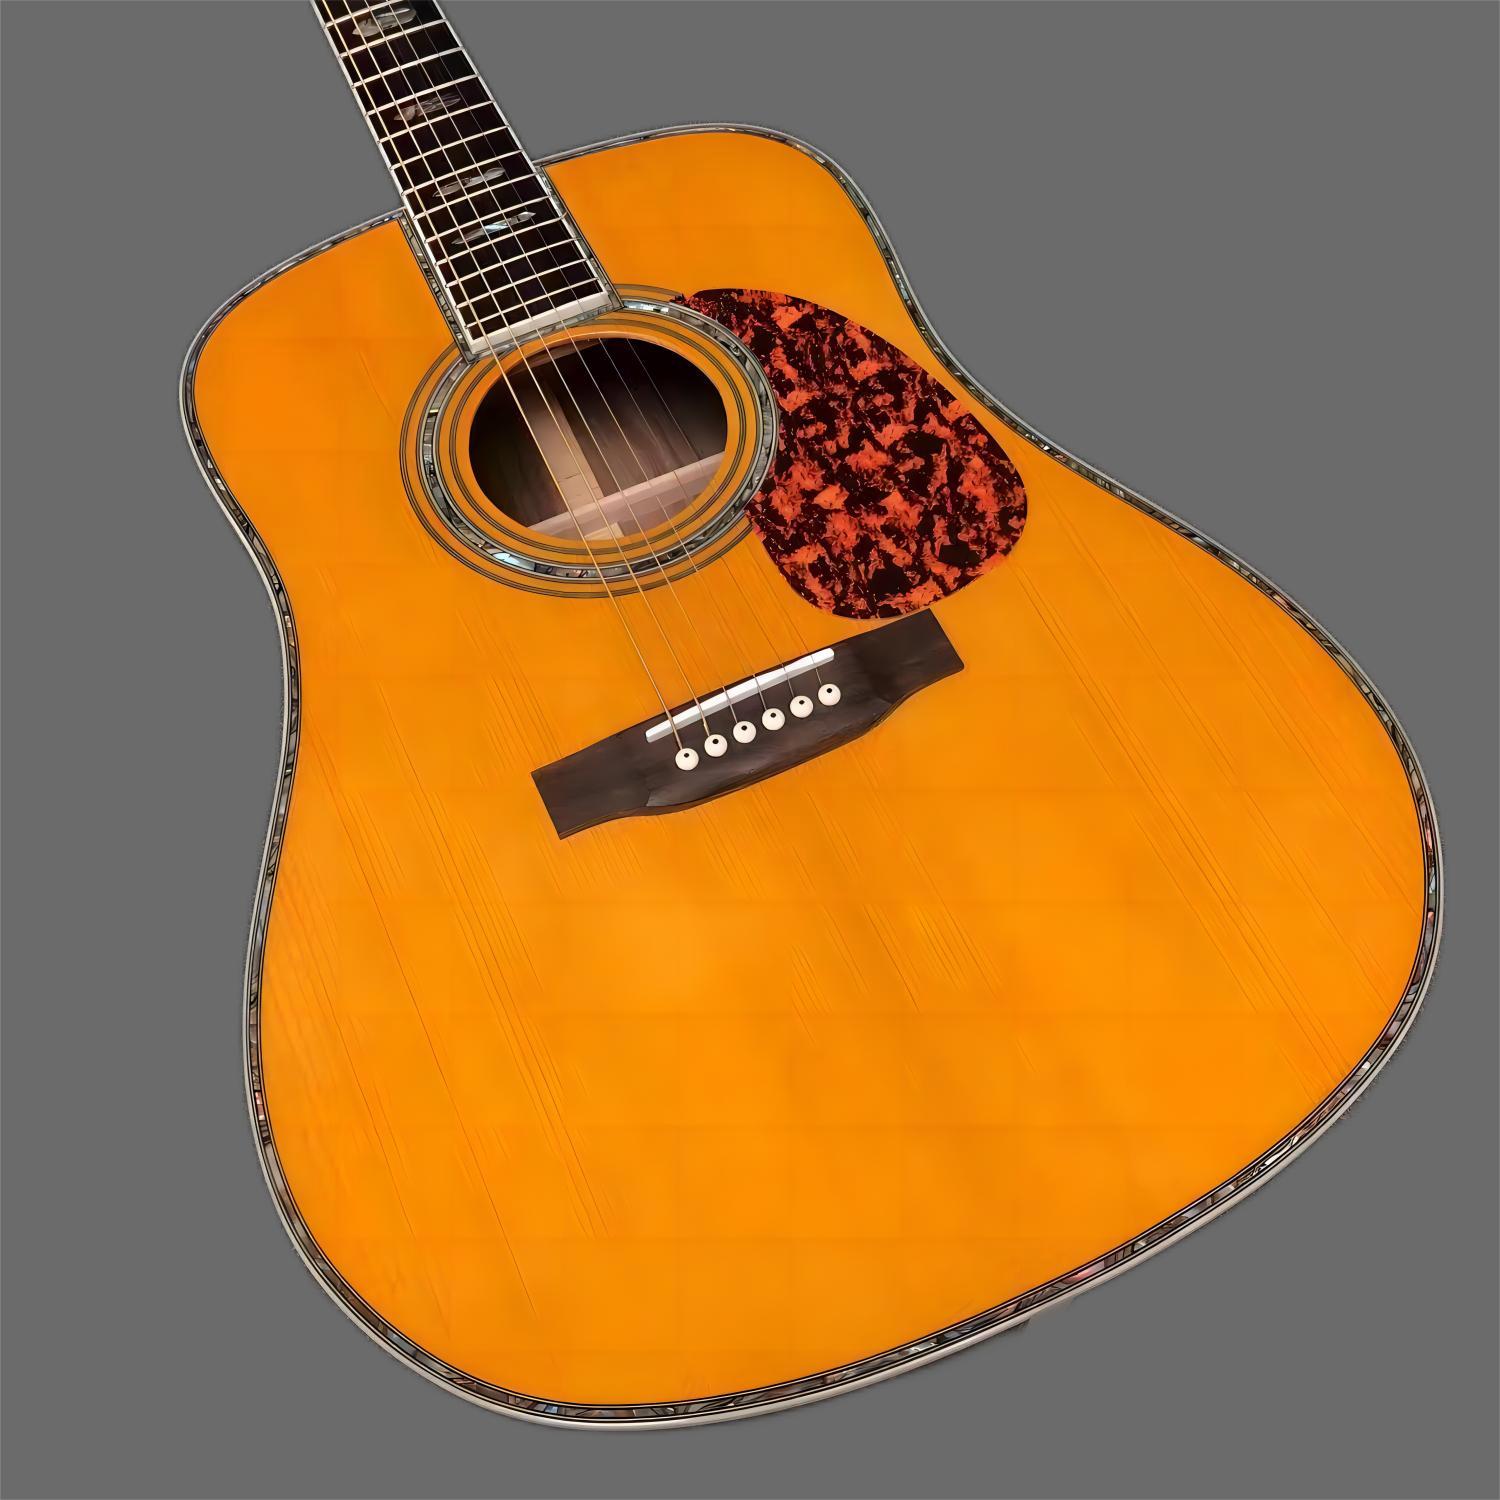 

Custom guitar, solid AAA spruce top, rosewood fingerboard, rosewood sides and back, 41-inch high-quality 45 acoustic guitar